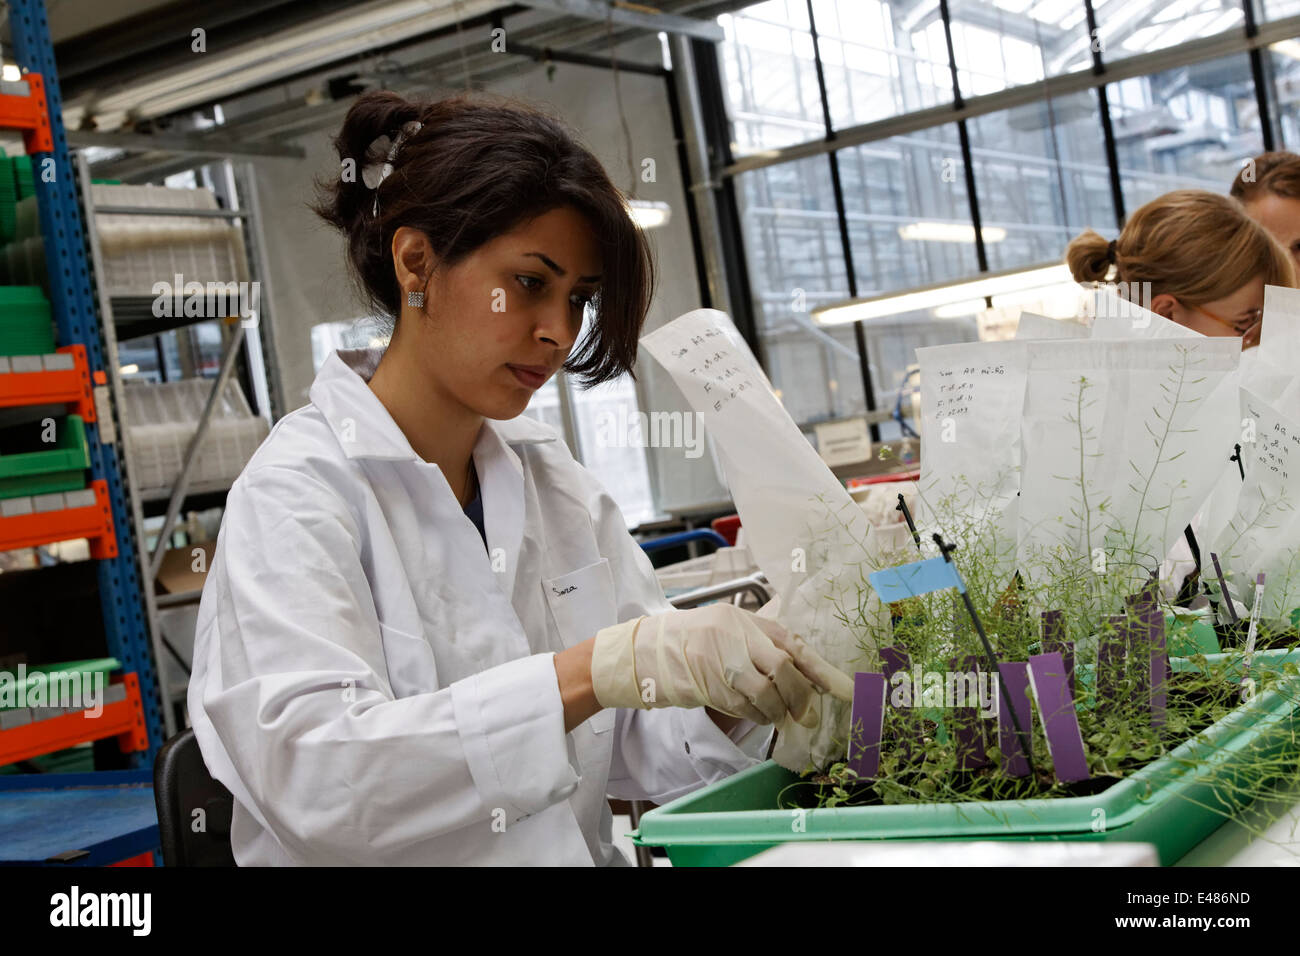 Max Planck Institute for Molecular Plant Physiology Foto Stock